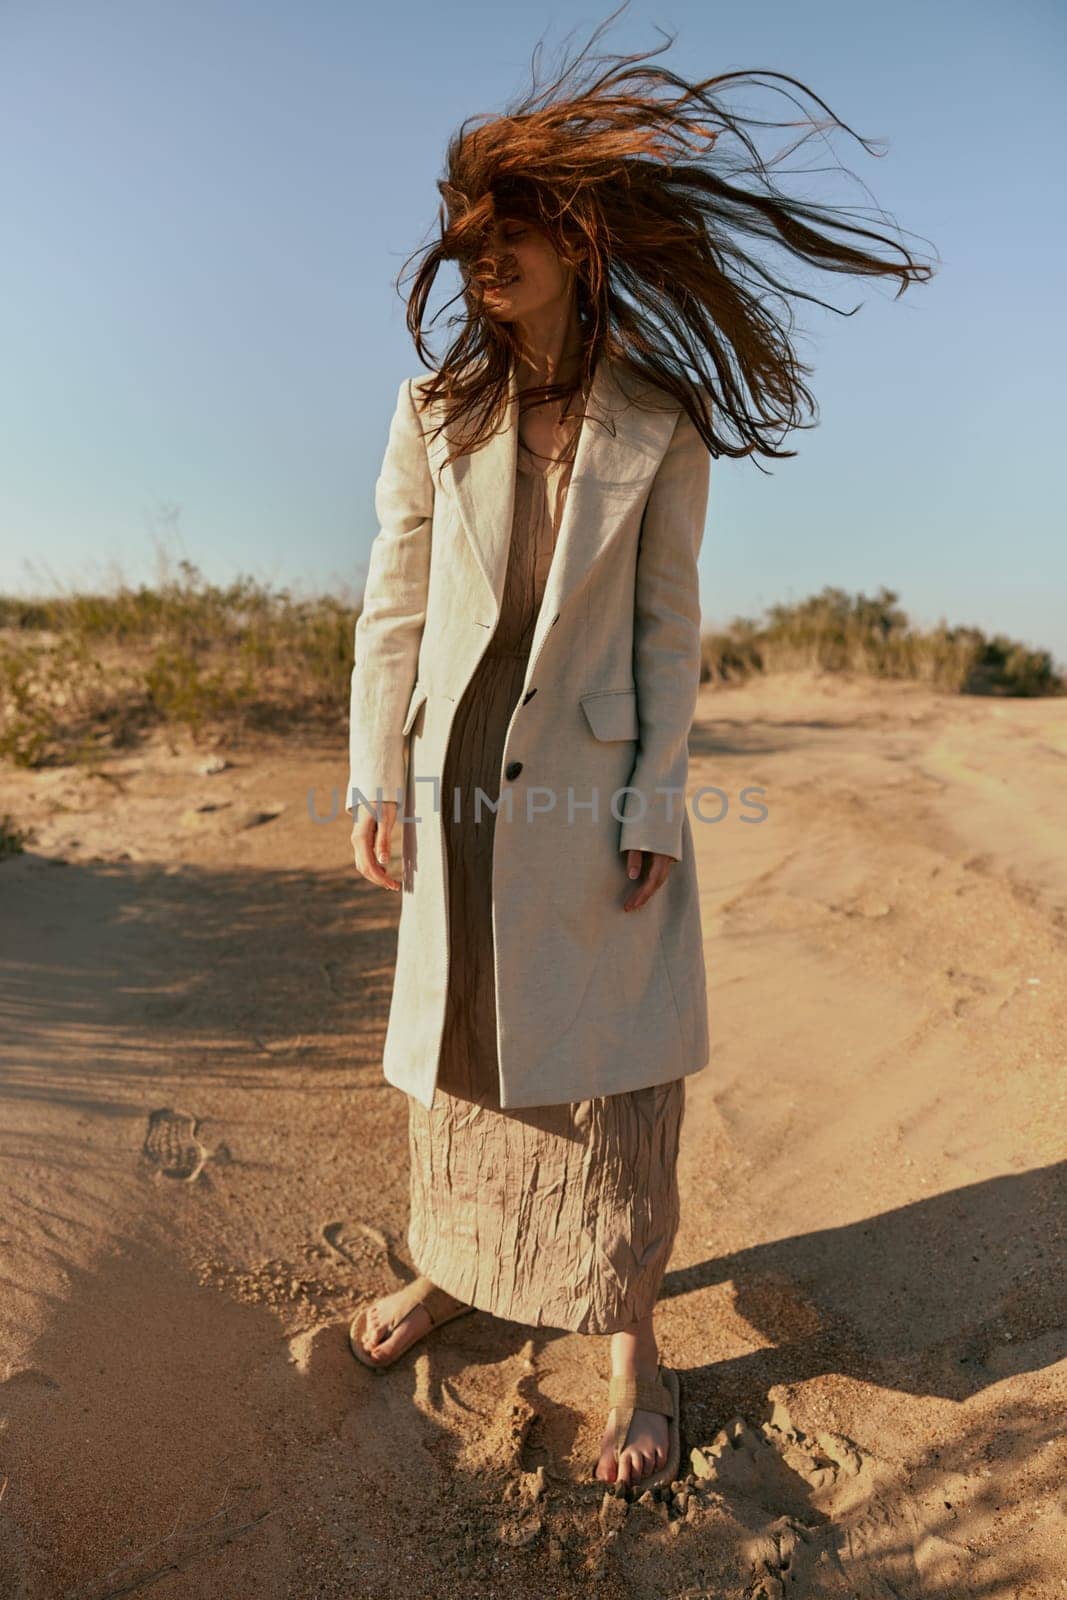 a woman with long red hair blown in the wind stands in stylish clothes on the sand by Vichizh